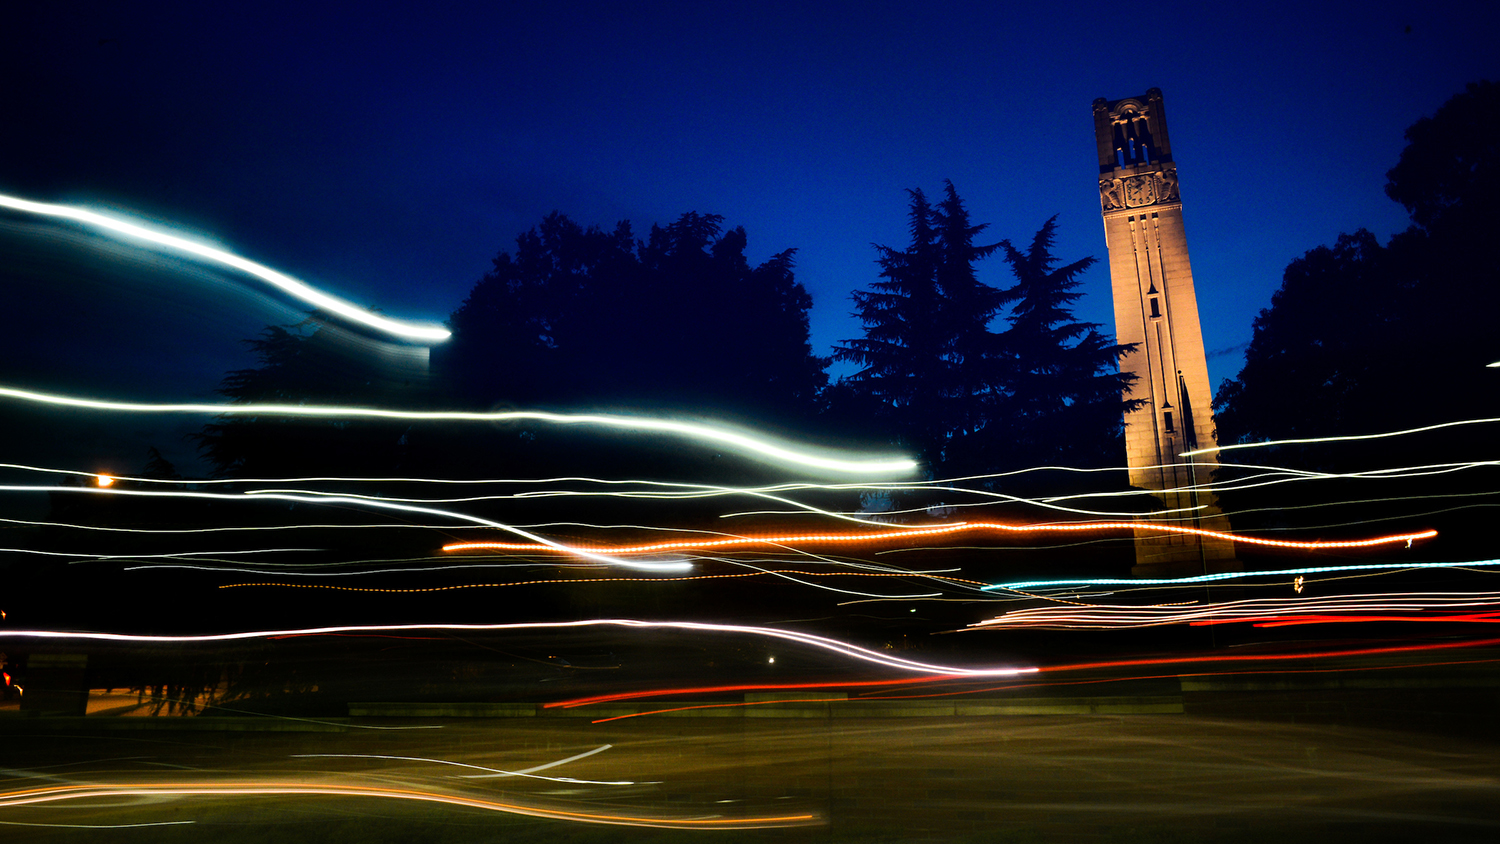 The NC State Belltower at dusk and night - Center for Geospatial Analytics at NC State University